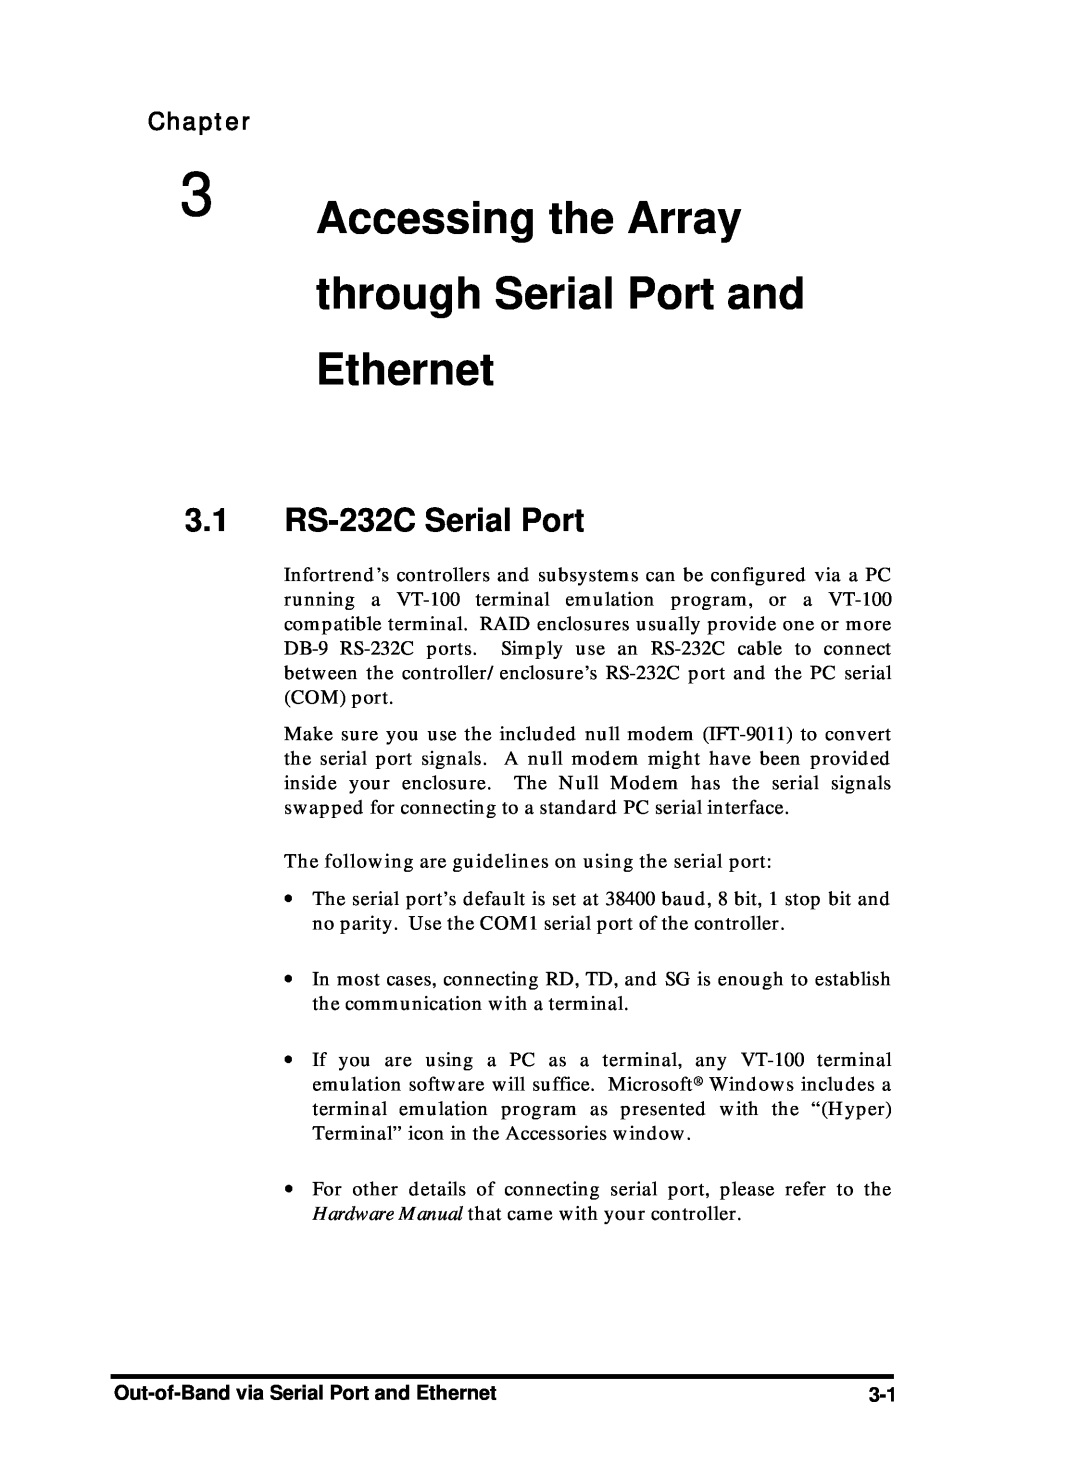 Compaq Infortrend manual Accessing the Array, through Serial Port and, Ethernet, 3.1 RS-232C Serial Port, Chapter 